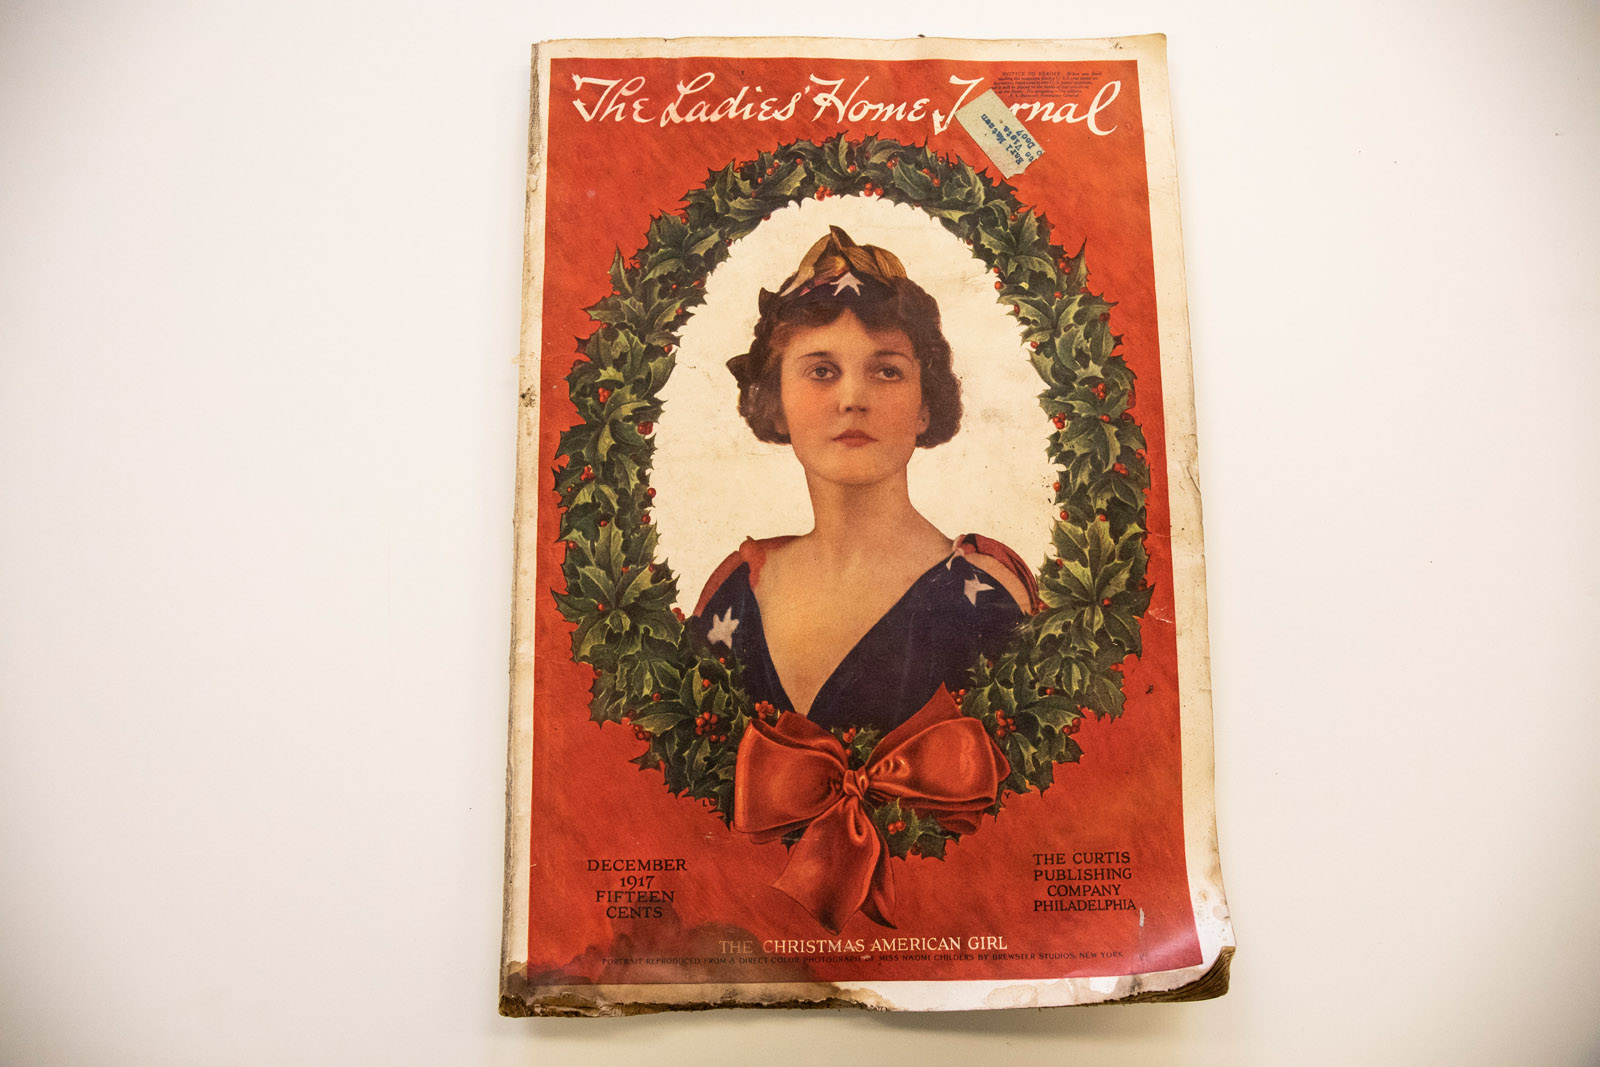 Pictured: A Ladies Home Journal magazine. Ella Axelrod has spent months investigating, cataloging and digging into the mysteries of a buried box of odd treasures from the late 1800s and early 1900s as a part of their Summer Collaborative Research.